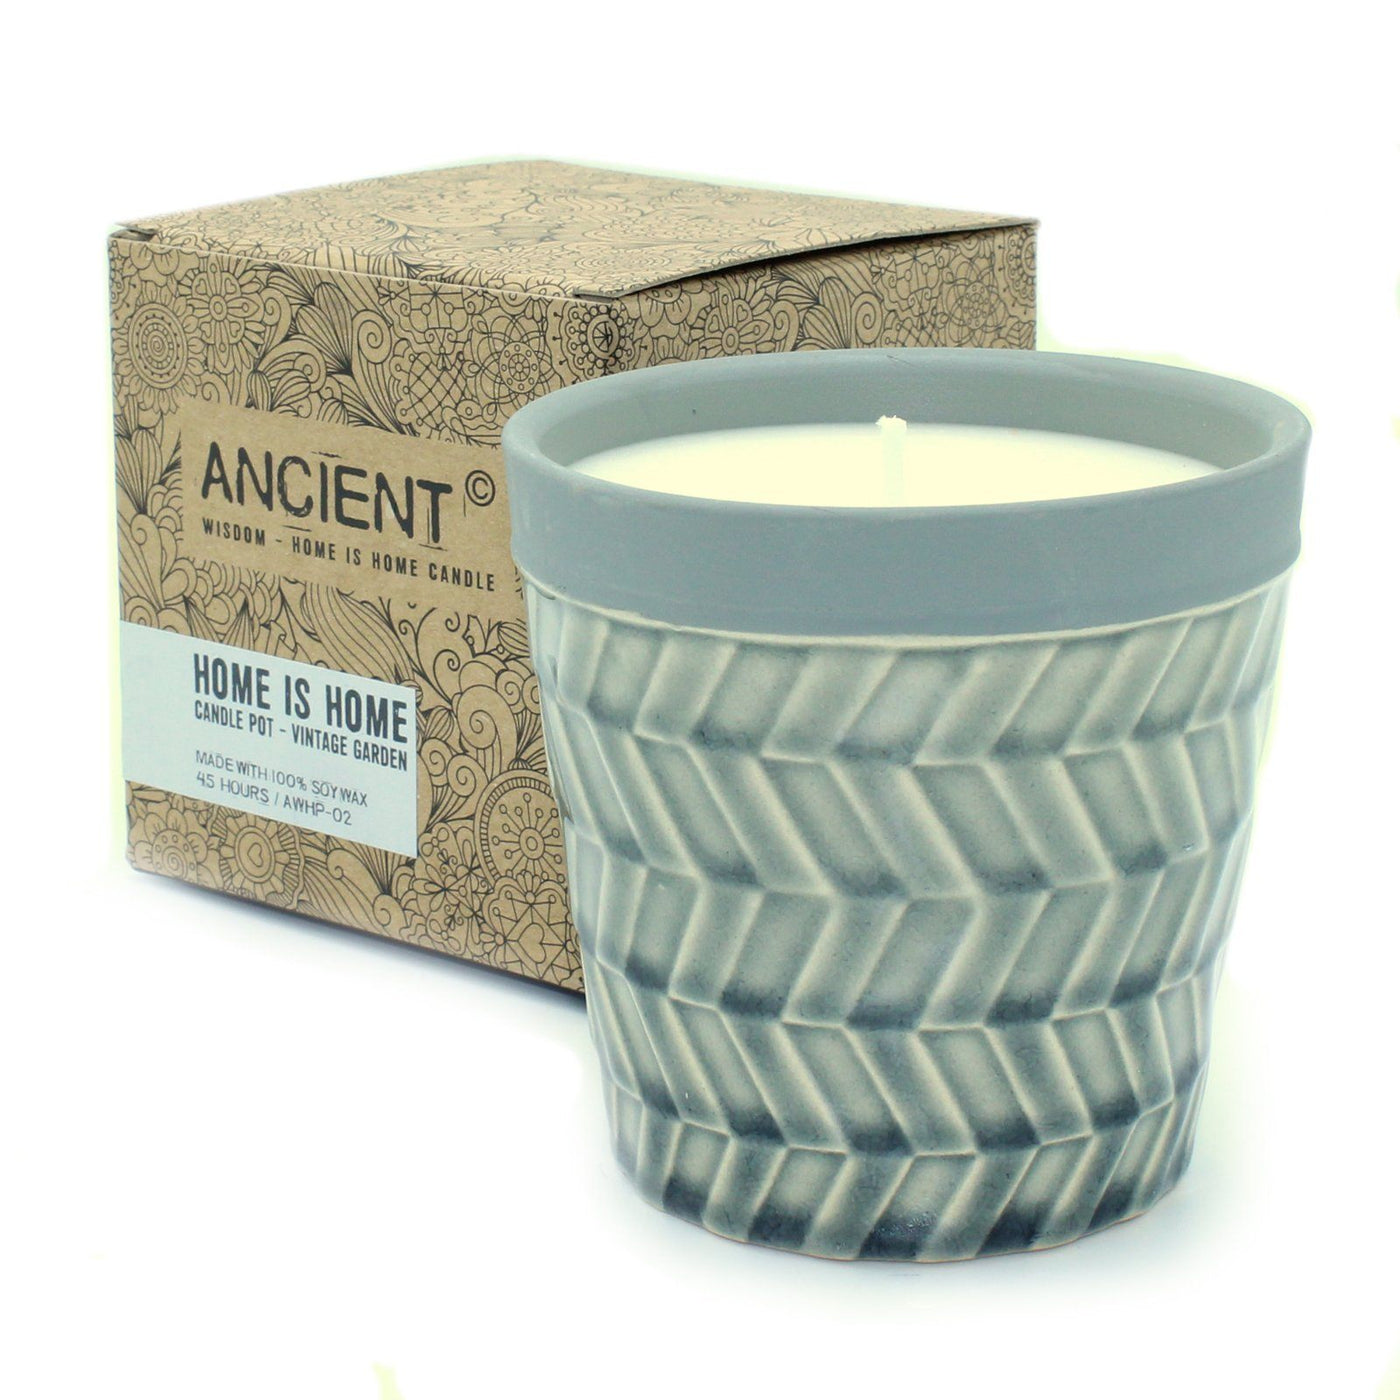 Large Home is Home Candle Pot In Gift Box - Vintage Garden